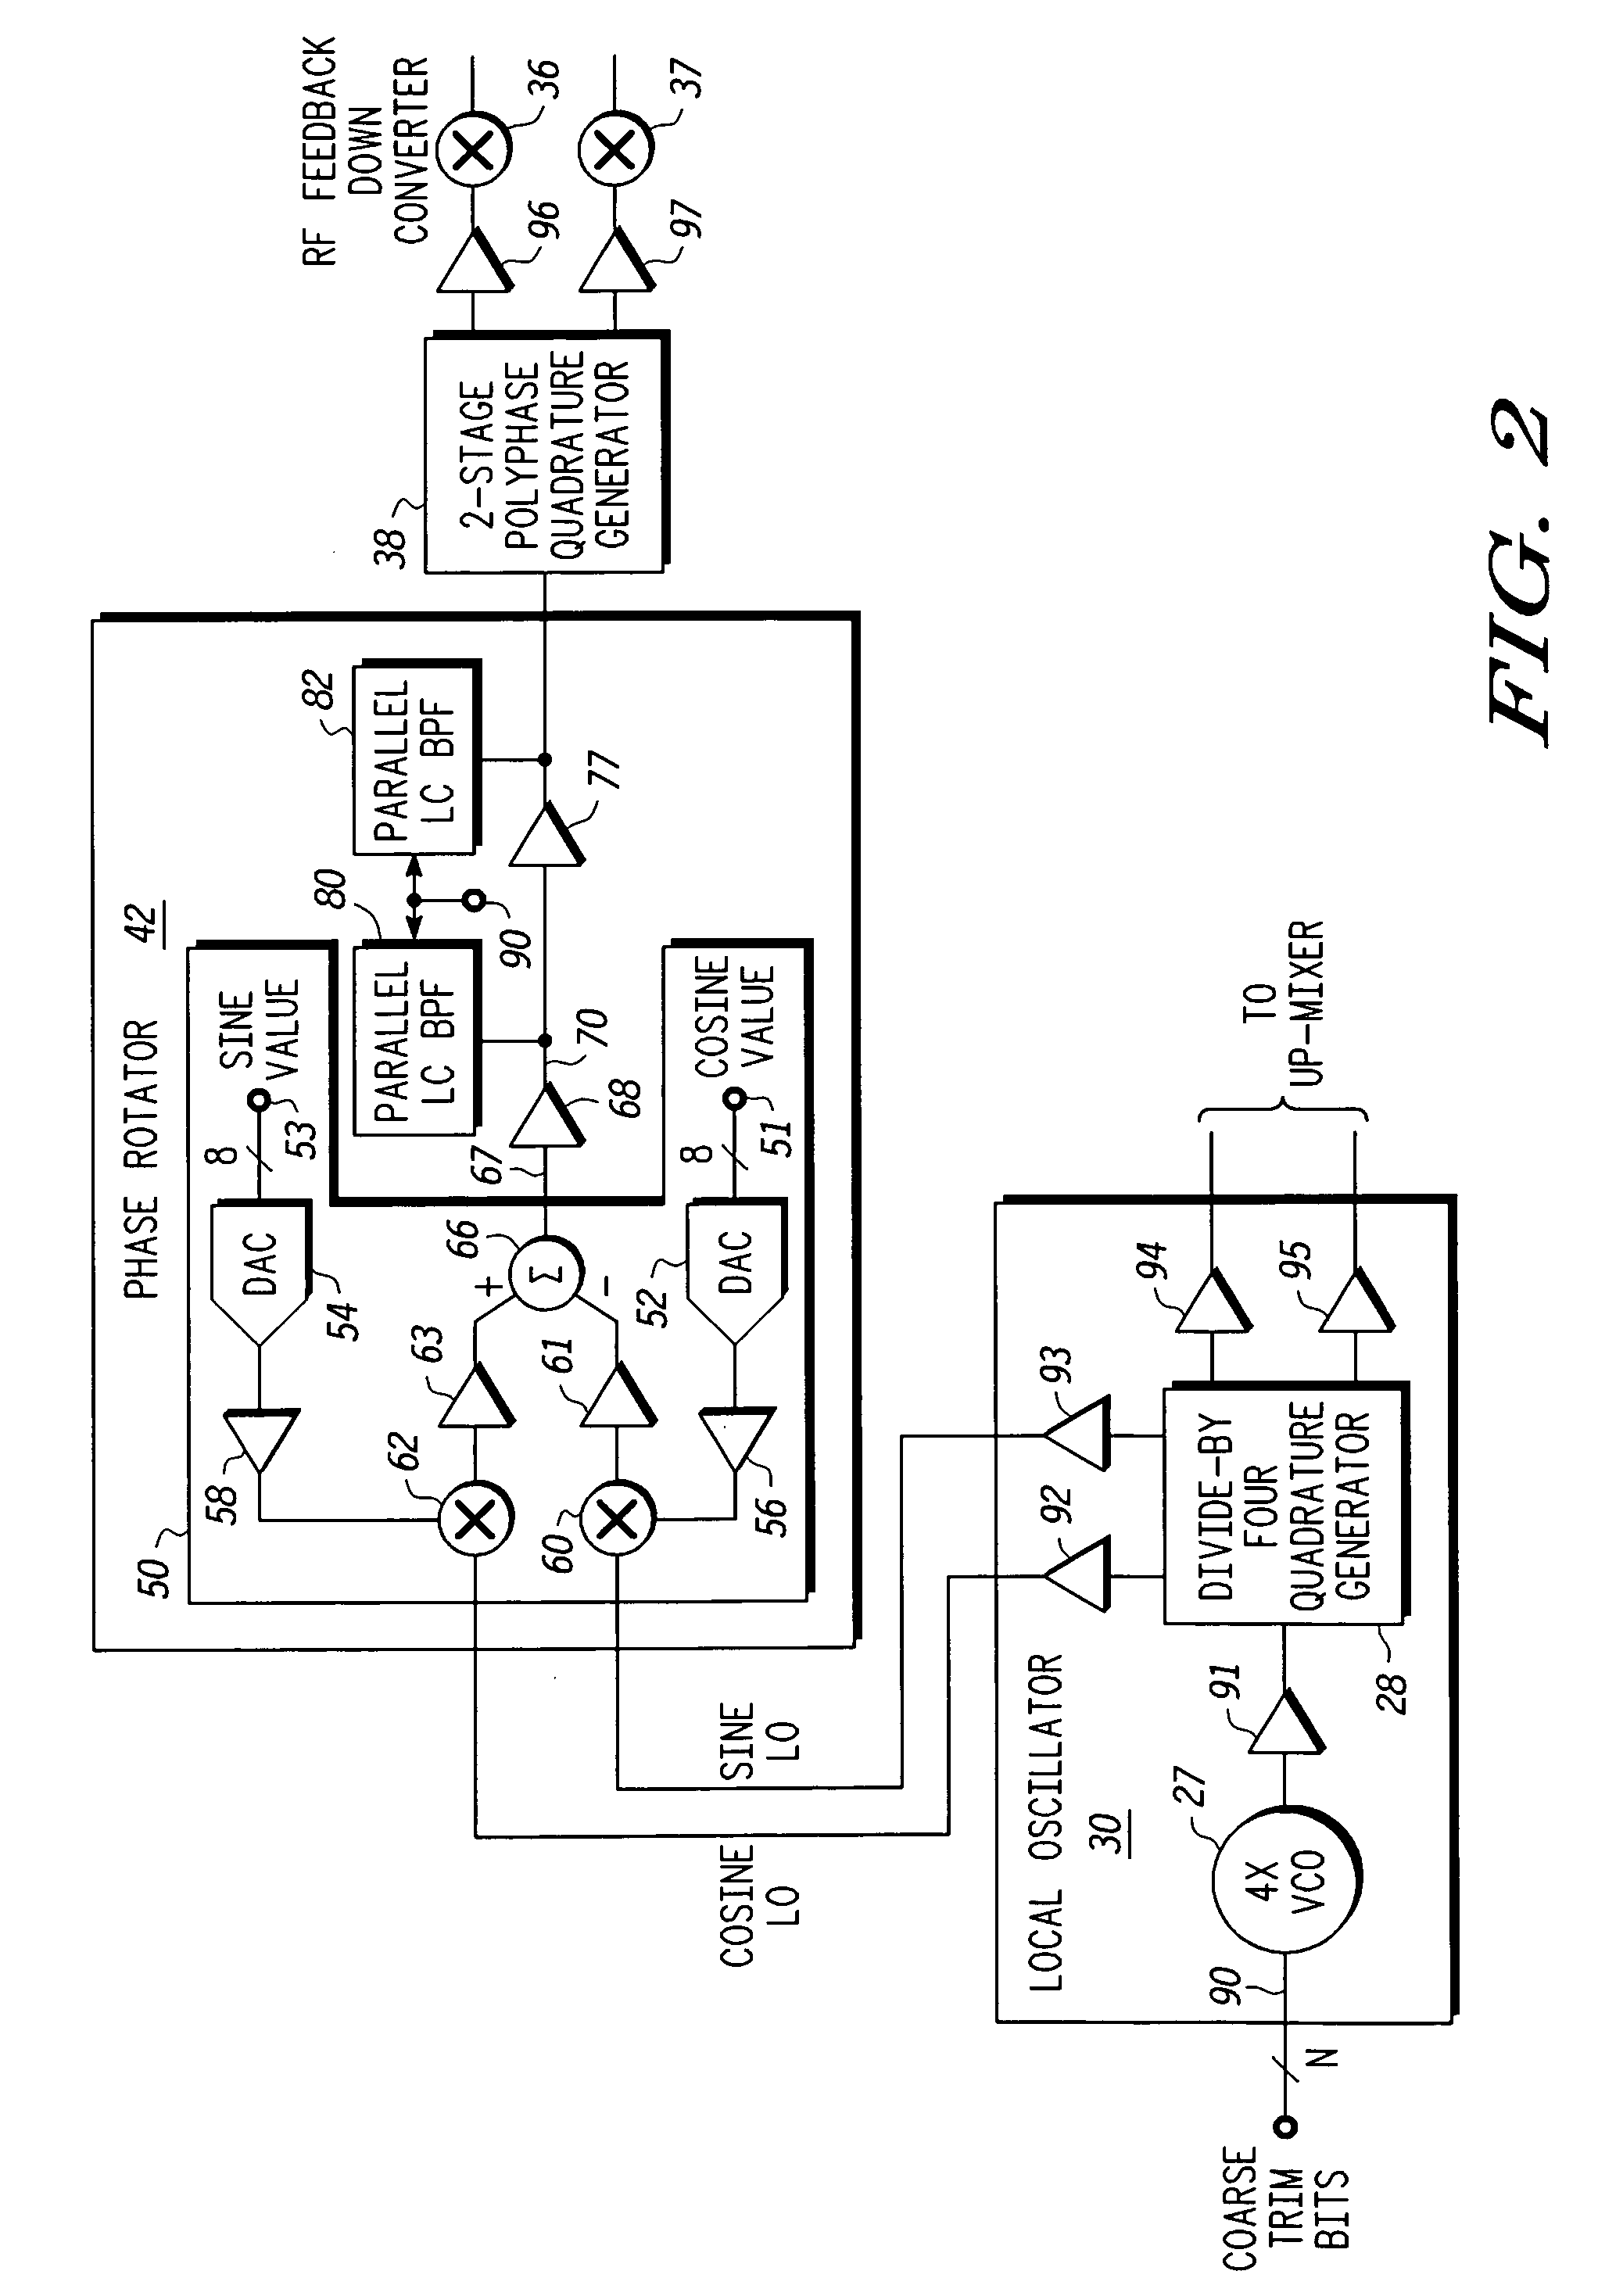 Center frequency control of an integrated phase rotator band-pass filter using VCO coarse trim bits